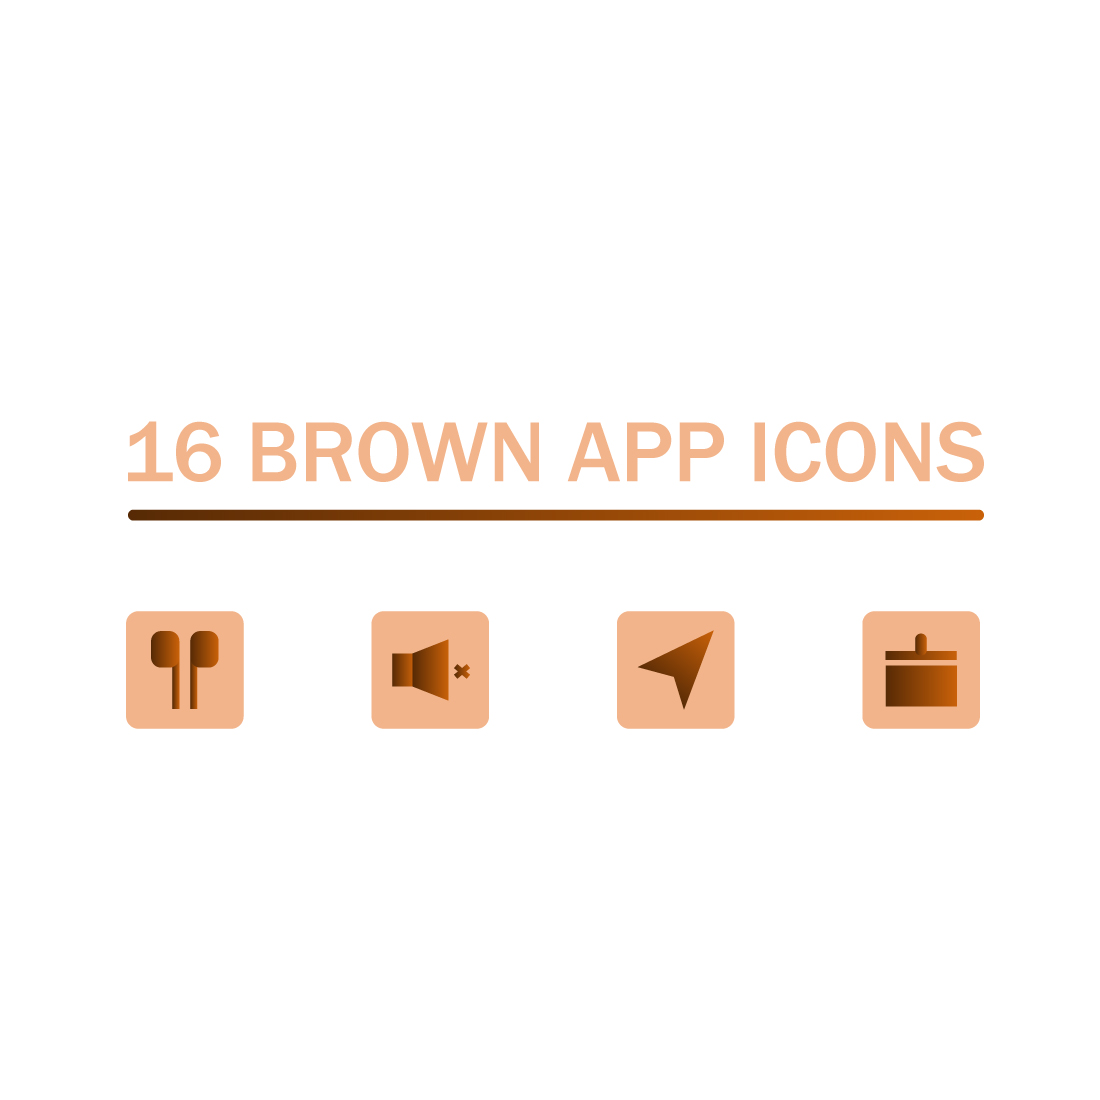 Free brown app icons main cover.